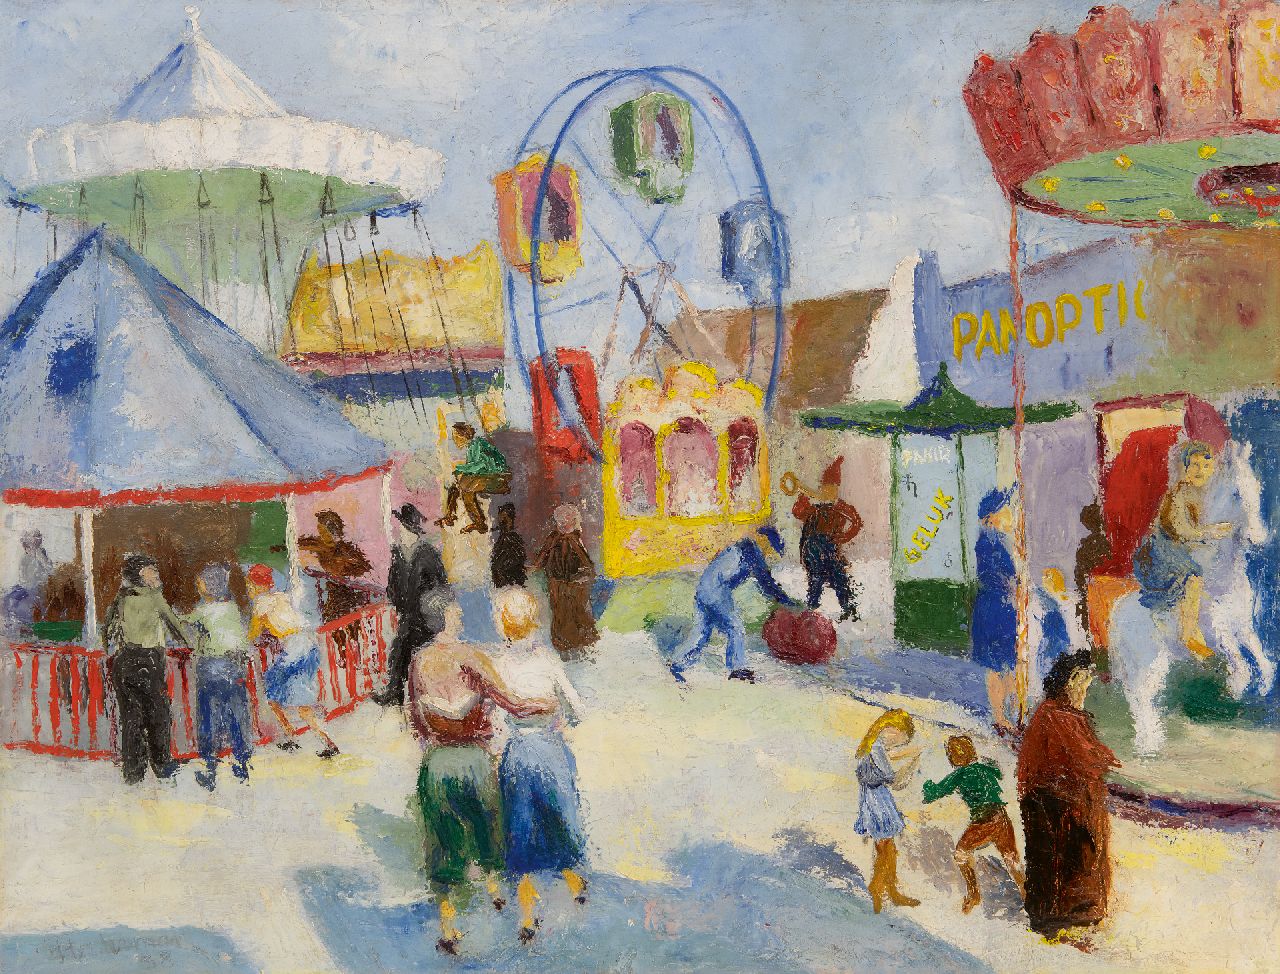 Hesterman F.C.  | F.C. Hesterman | Paintings offered for sale | The fair, oil on canvas 45.7 x 60.4 cm, signed l.l. and dated '38